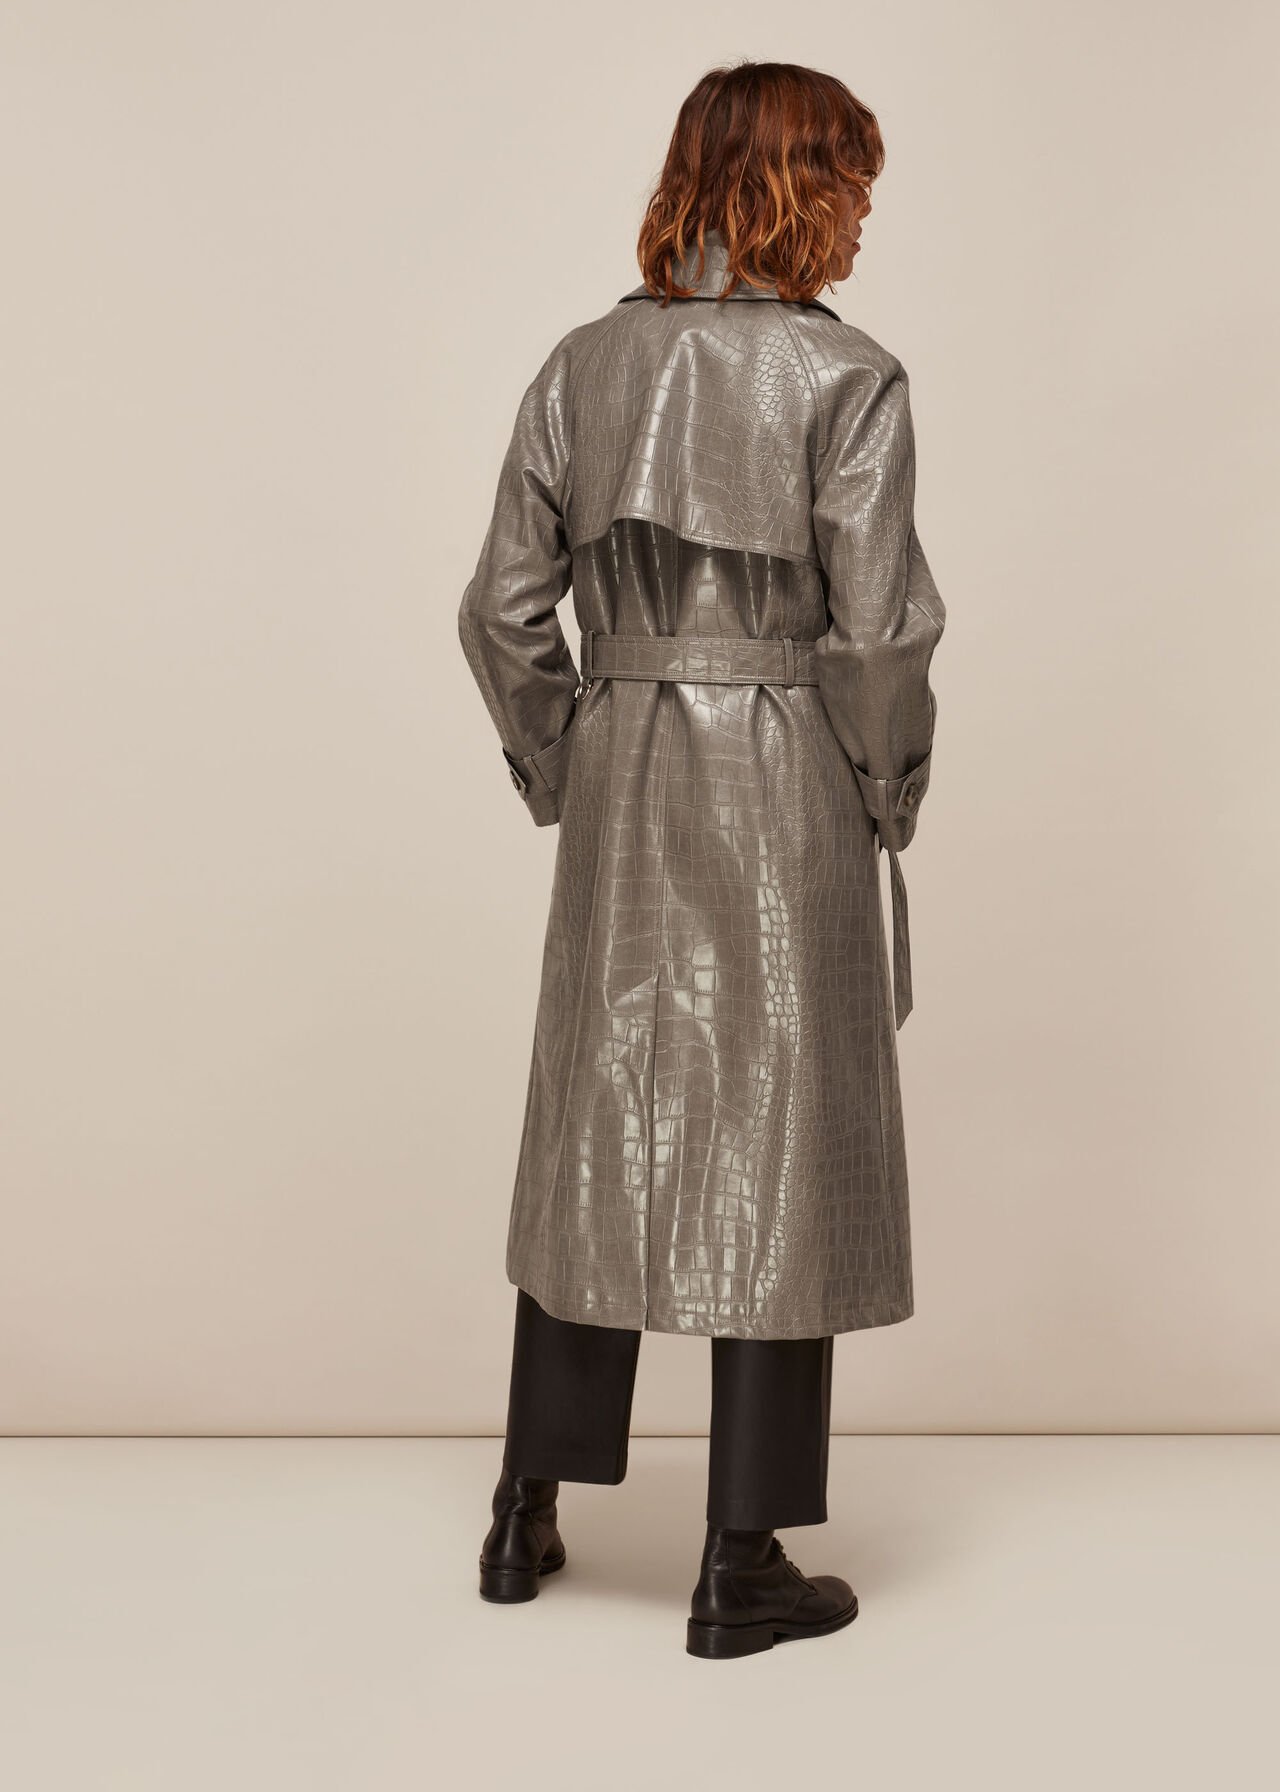 Croc Belted Trench Coat